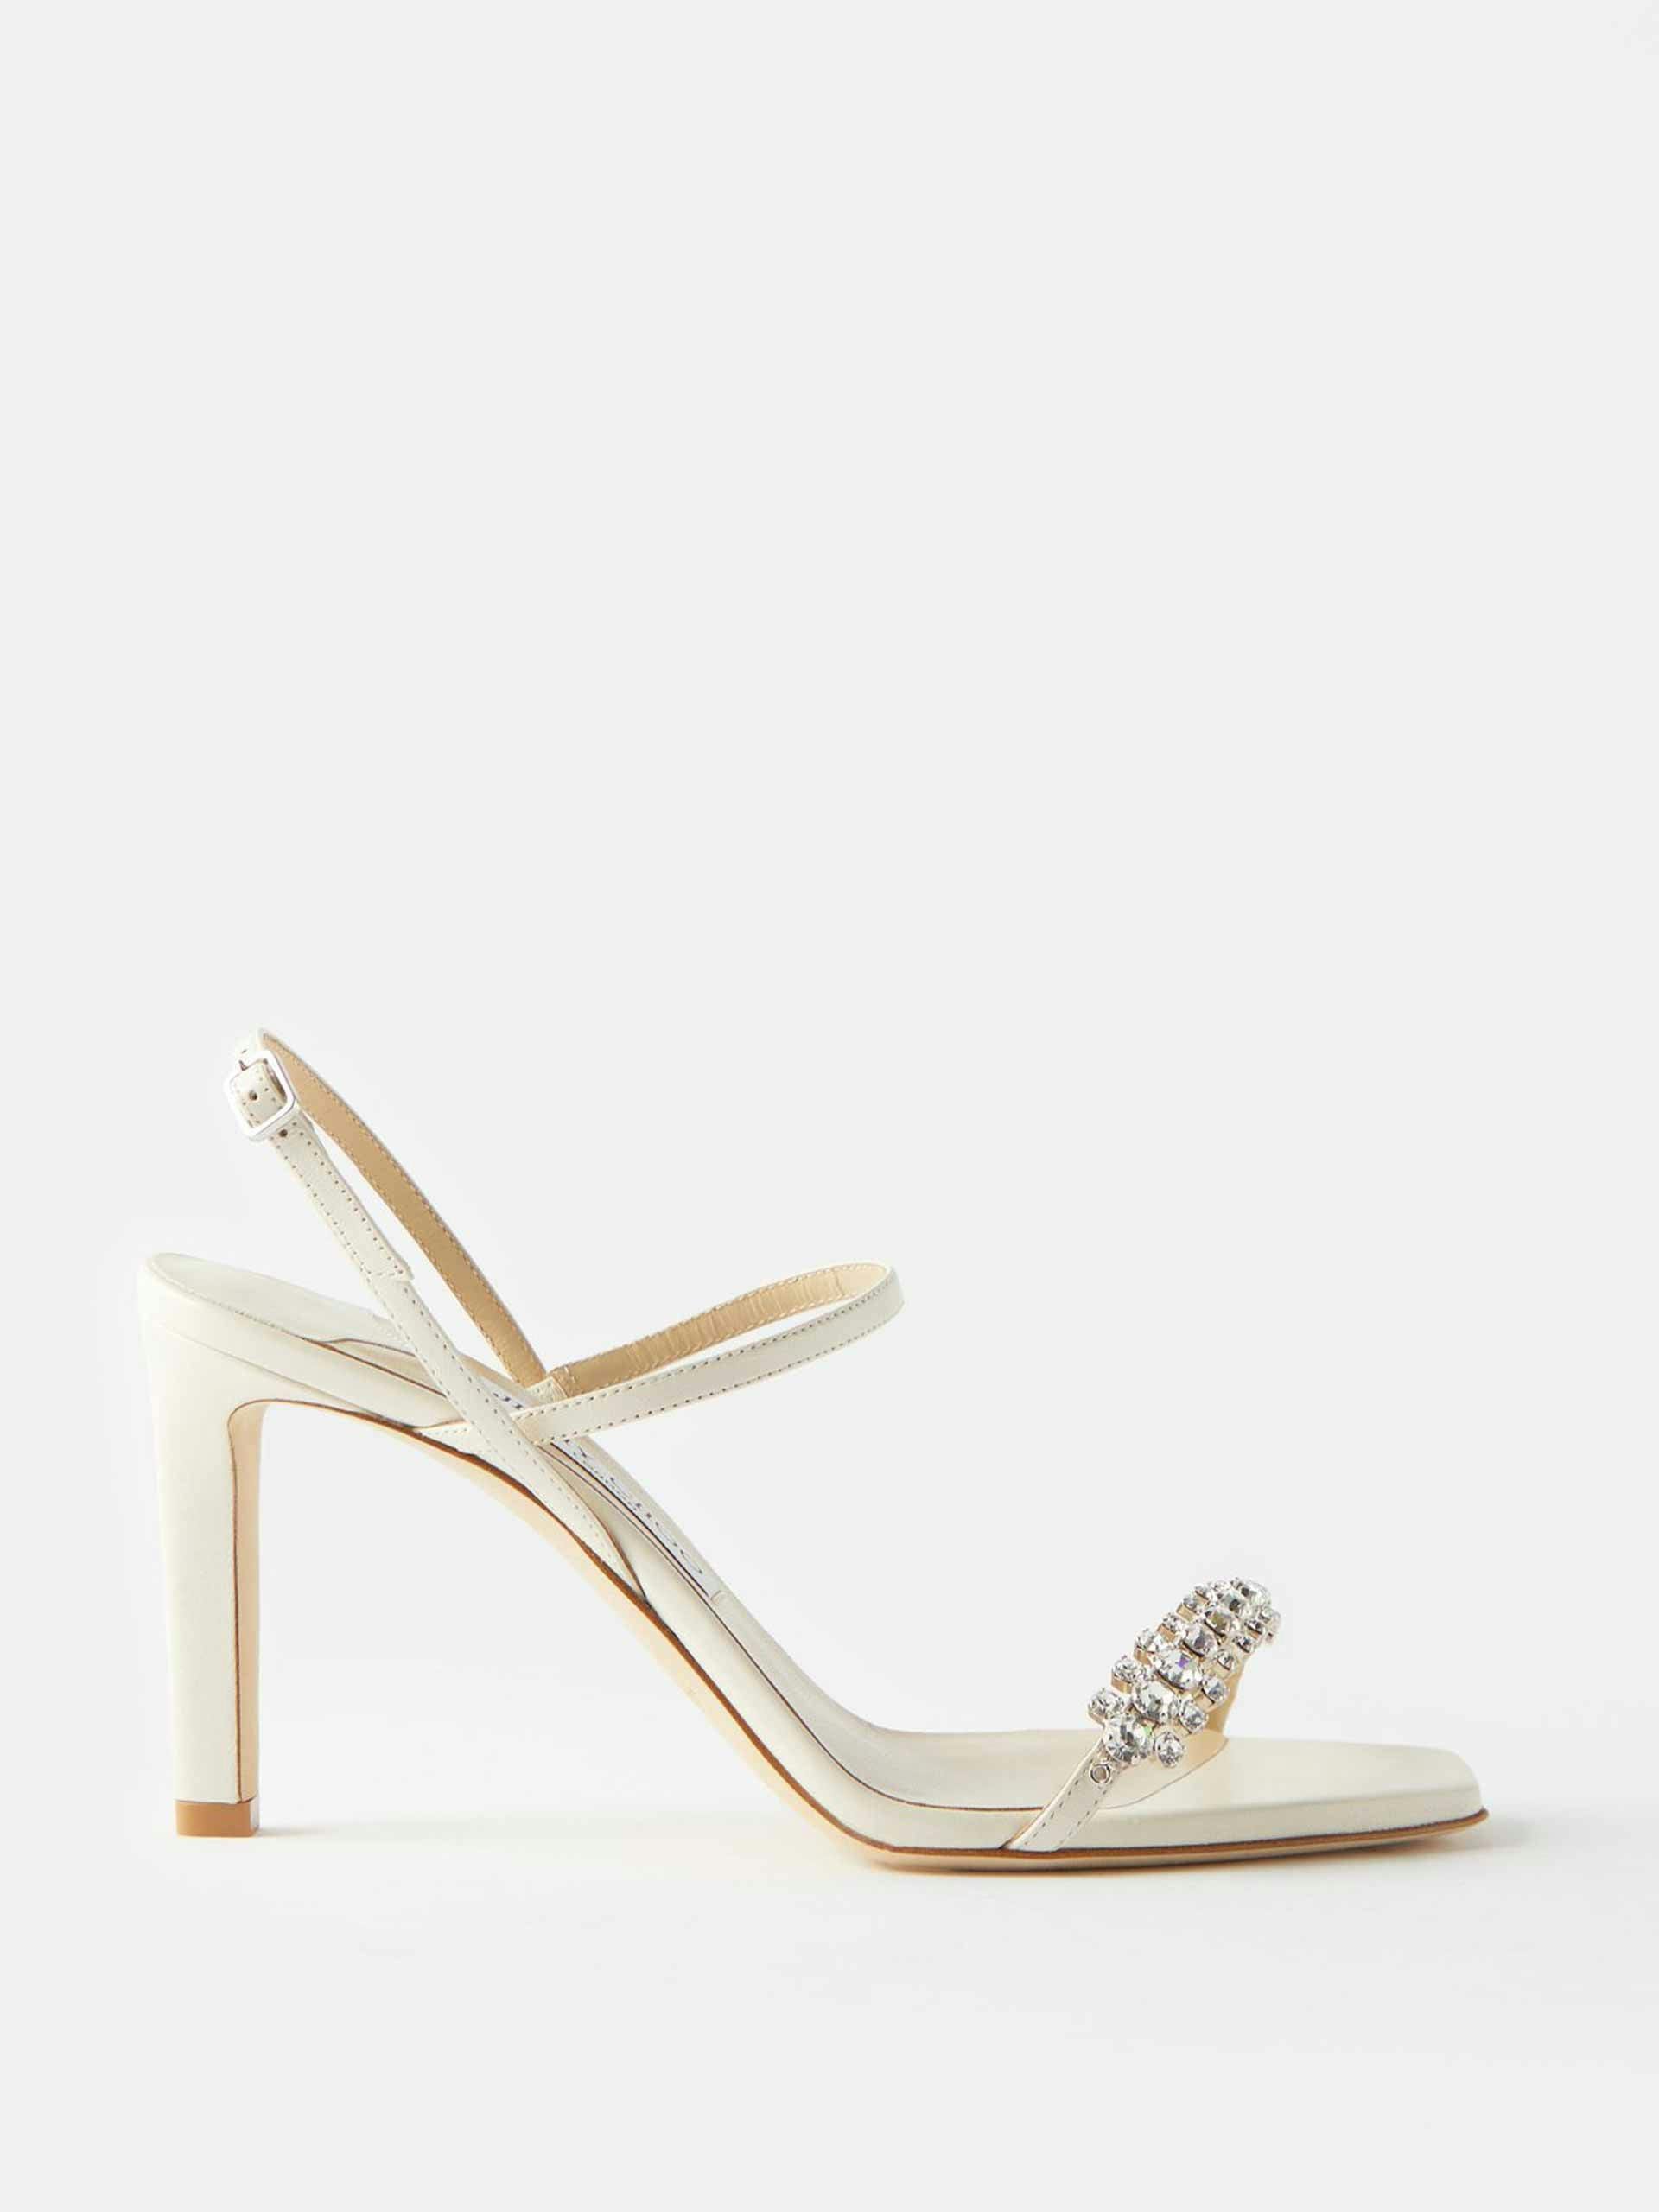 White crystal and leather sandals